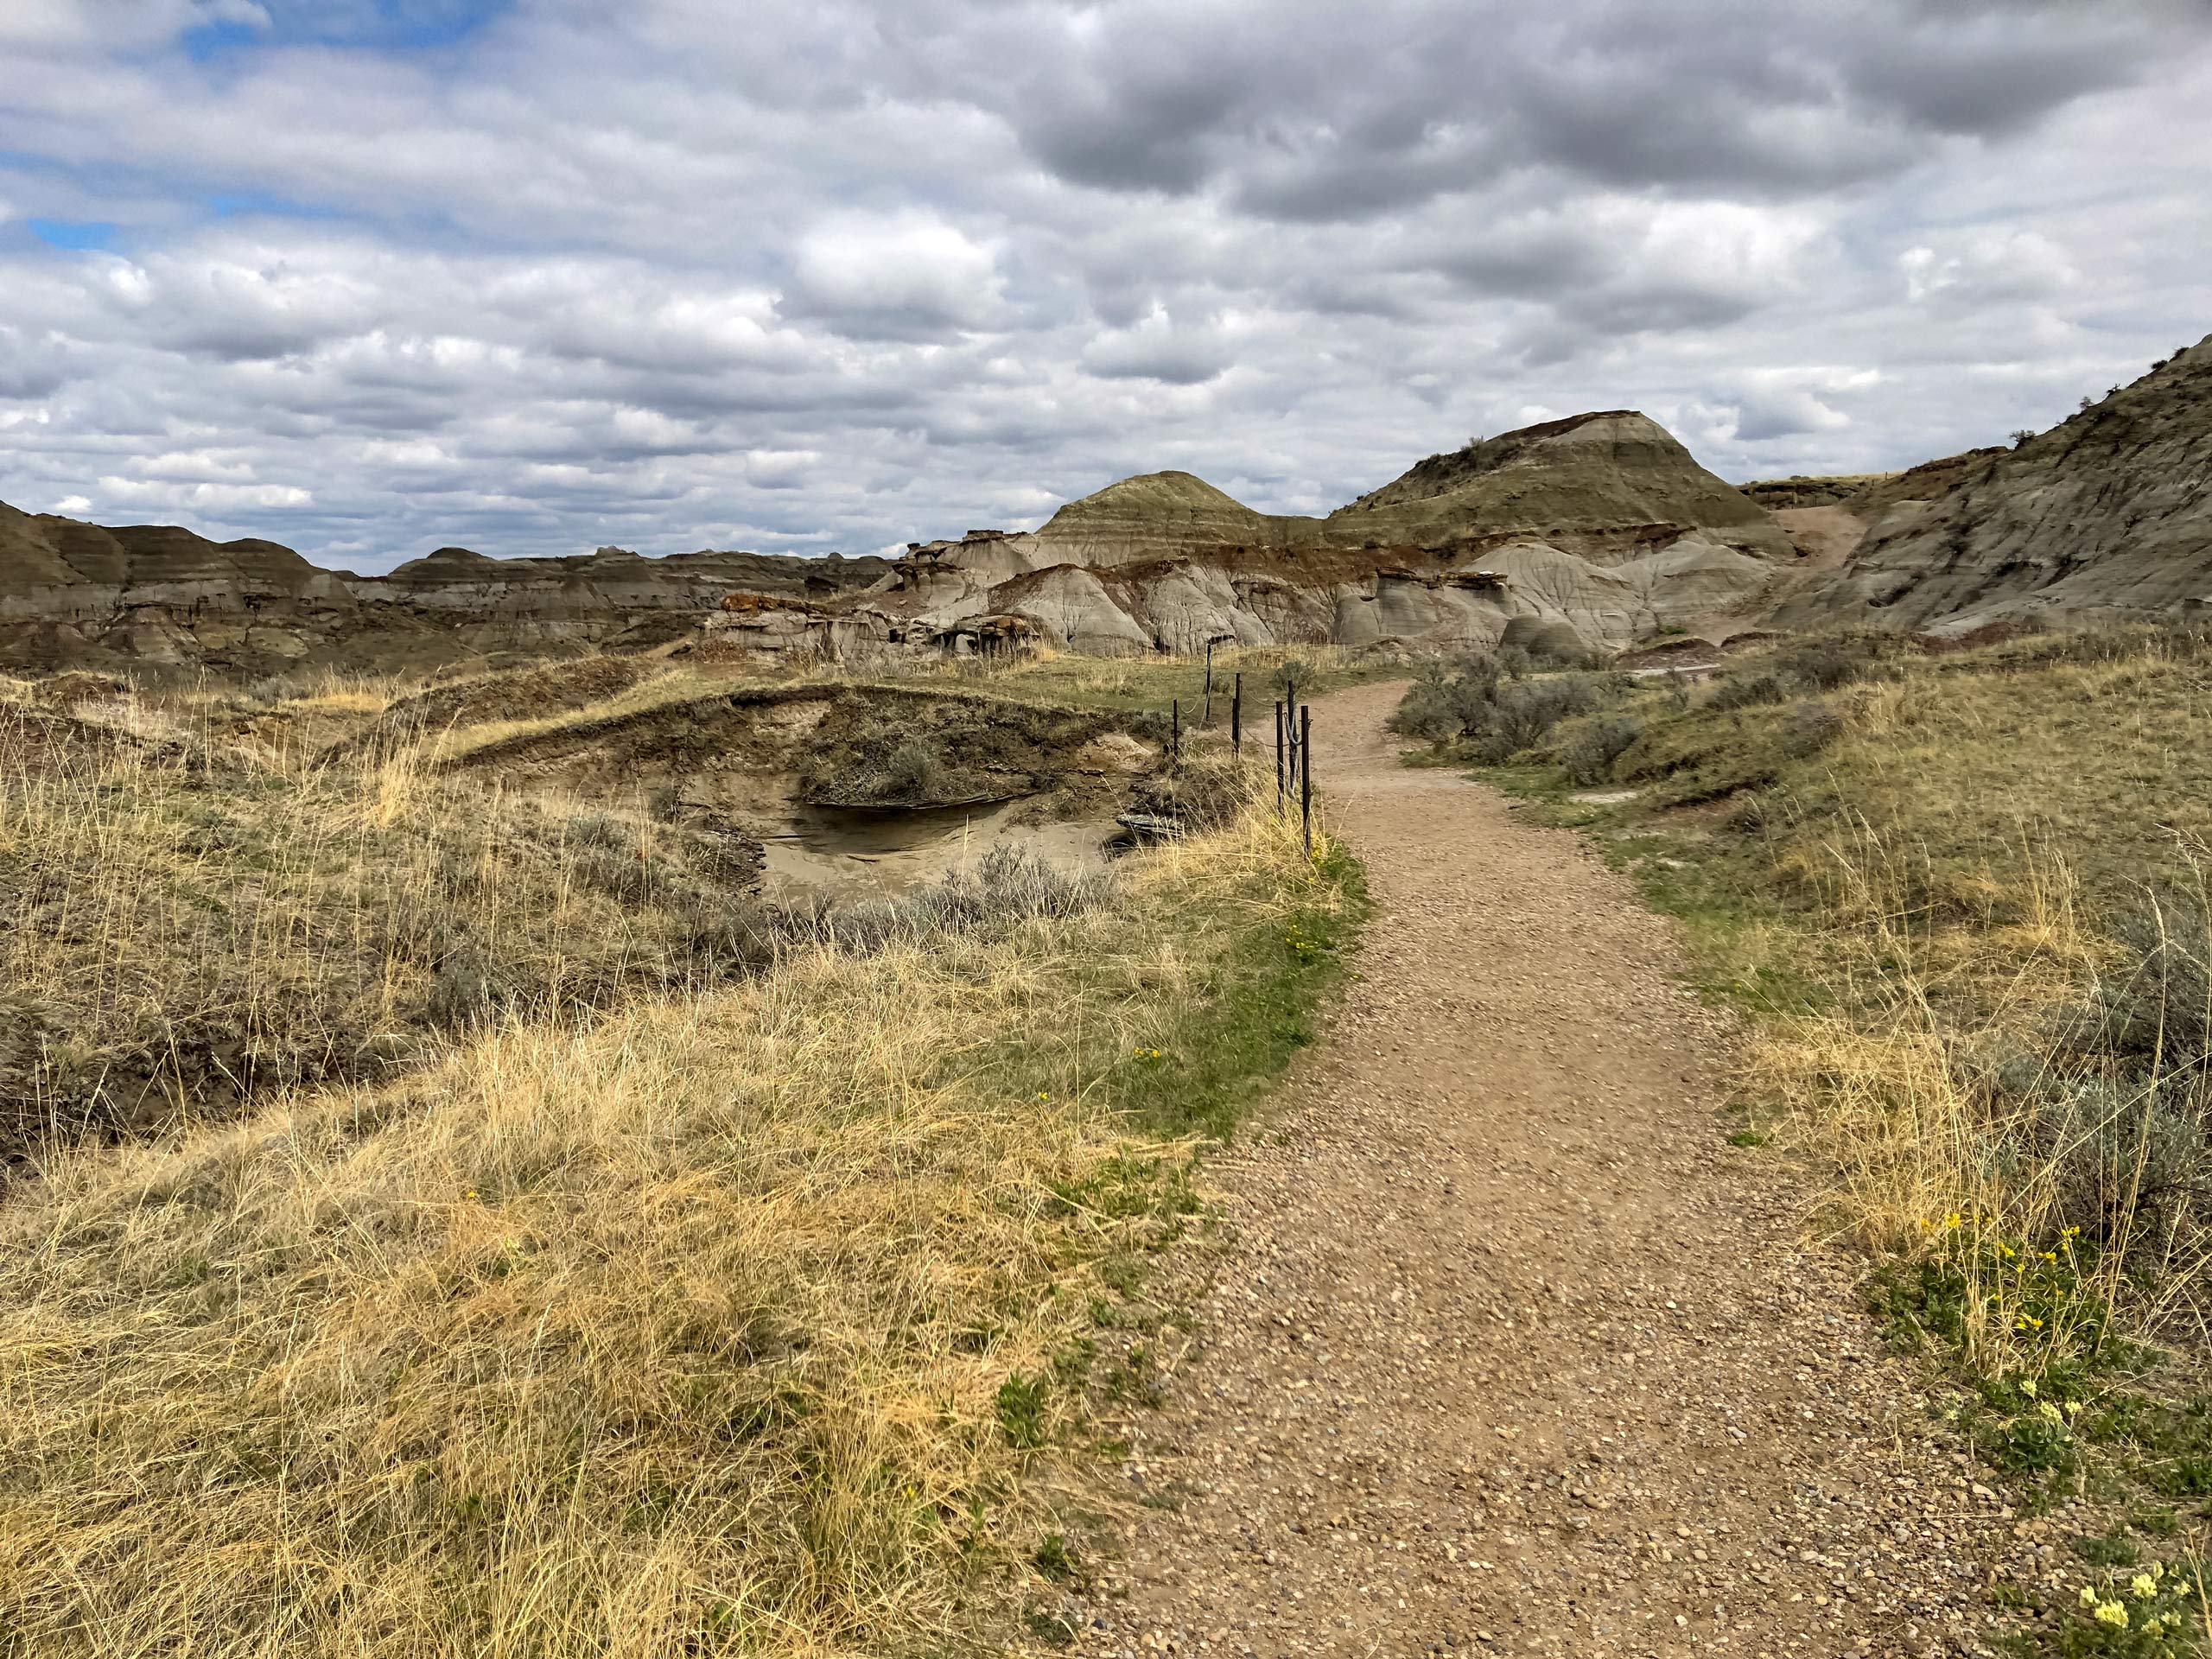 Badlands Trail climbing into the hills of Dinosaur Provincial Park